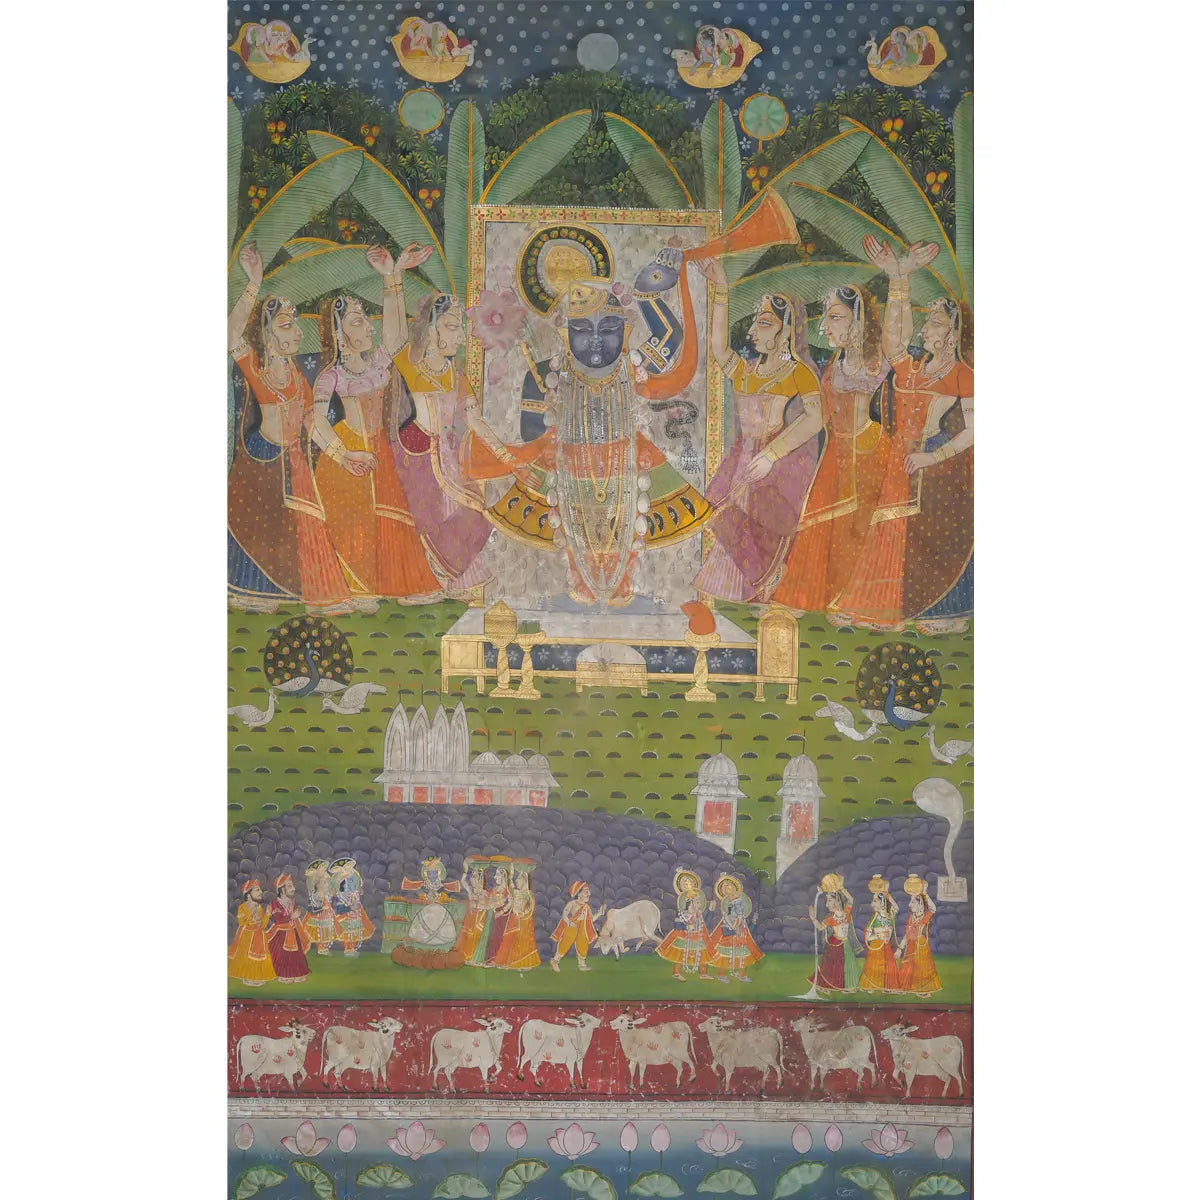 The Night of Sharad Purnima Pichwai Handmade Painting For Home Wall Decor